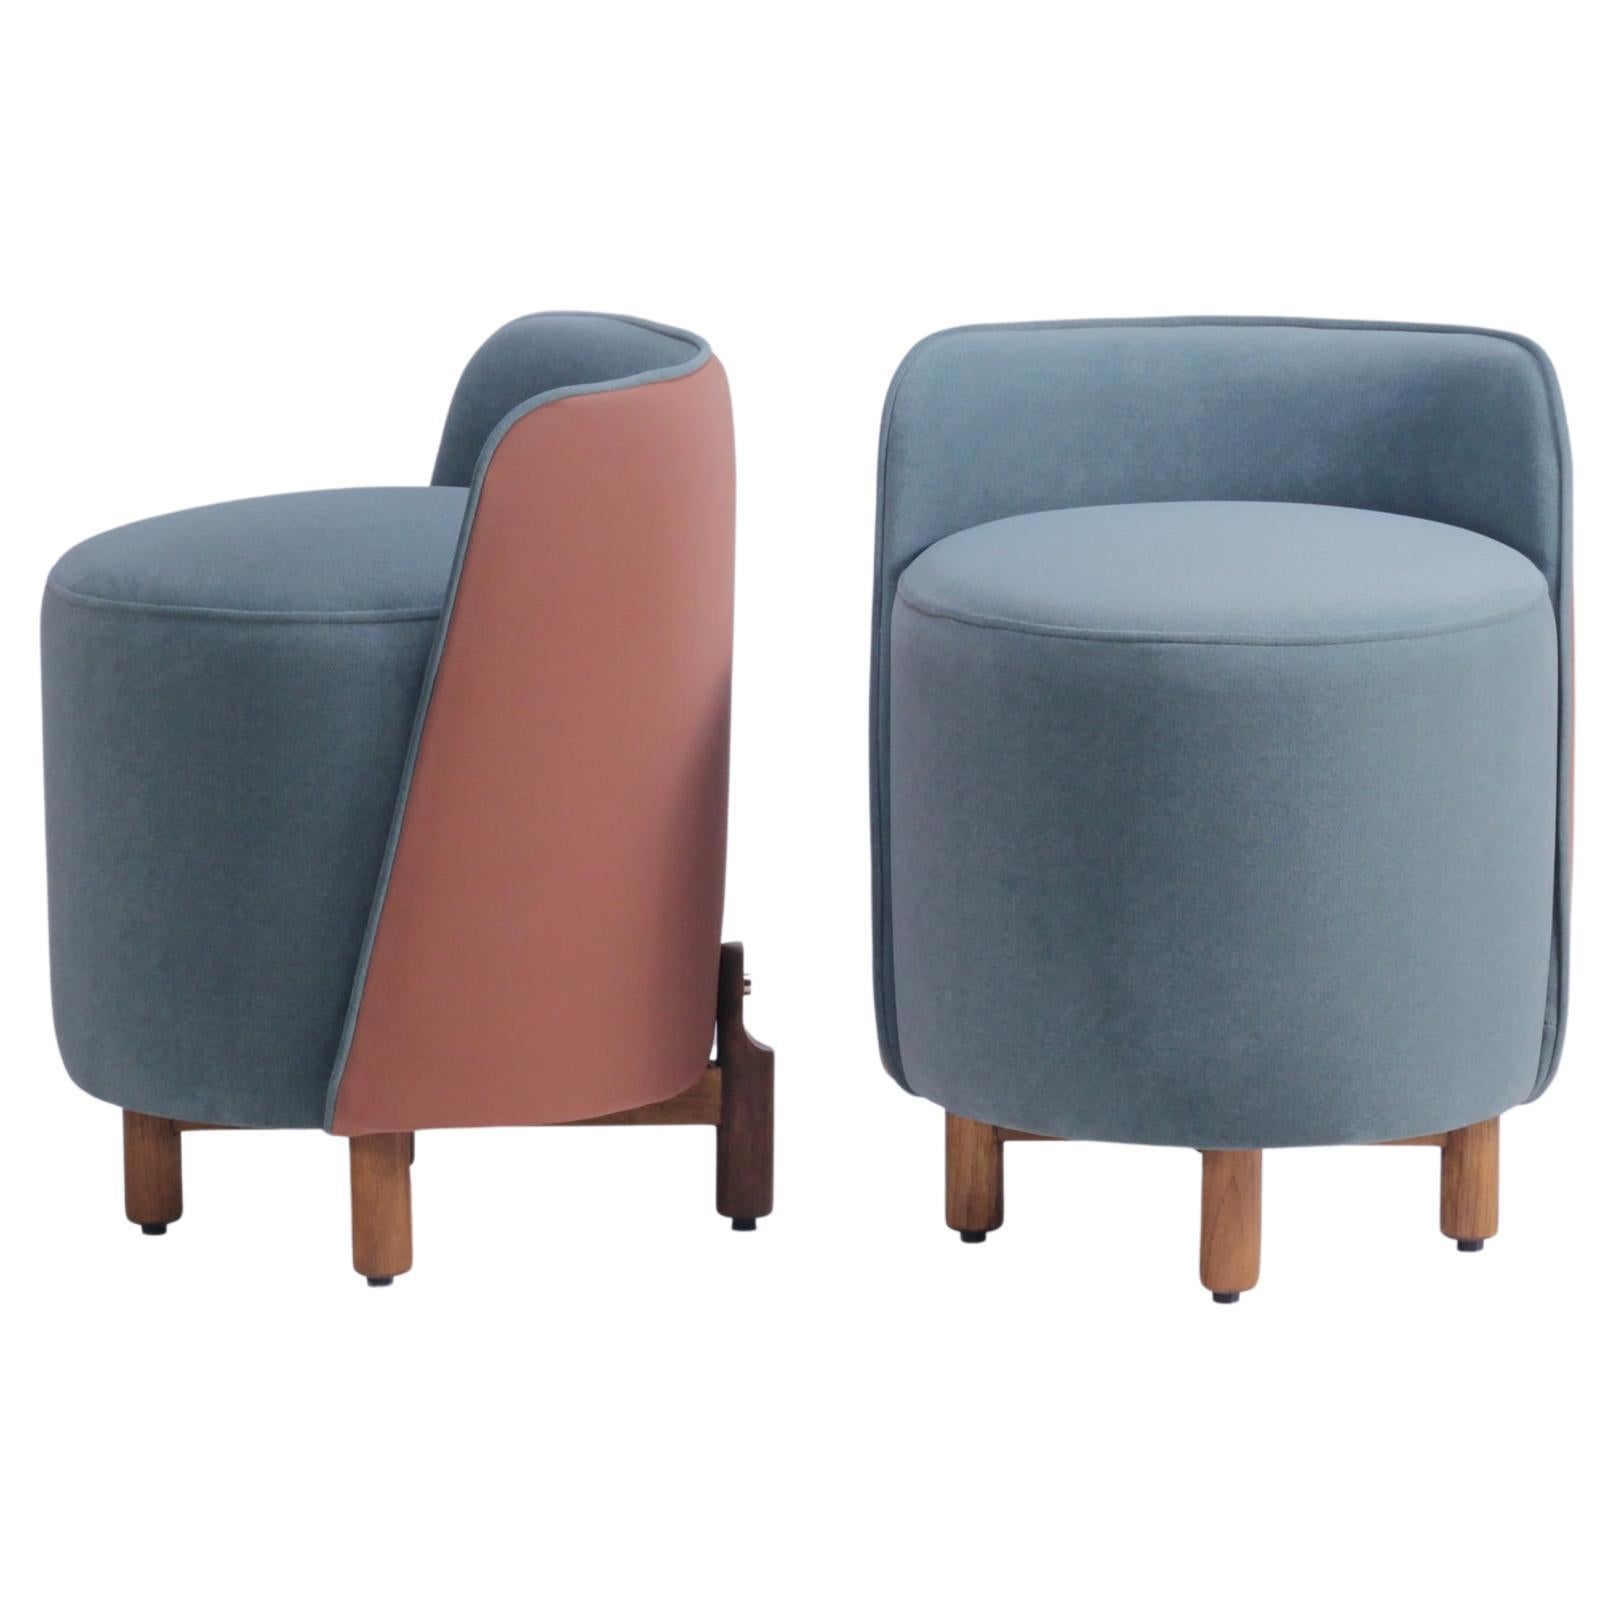 Set of 2 Modern Pouffe Seat with Backrest, Solid Wood Legs and Brass